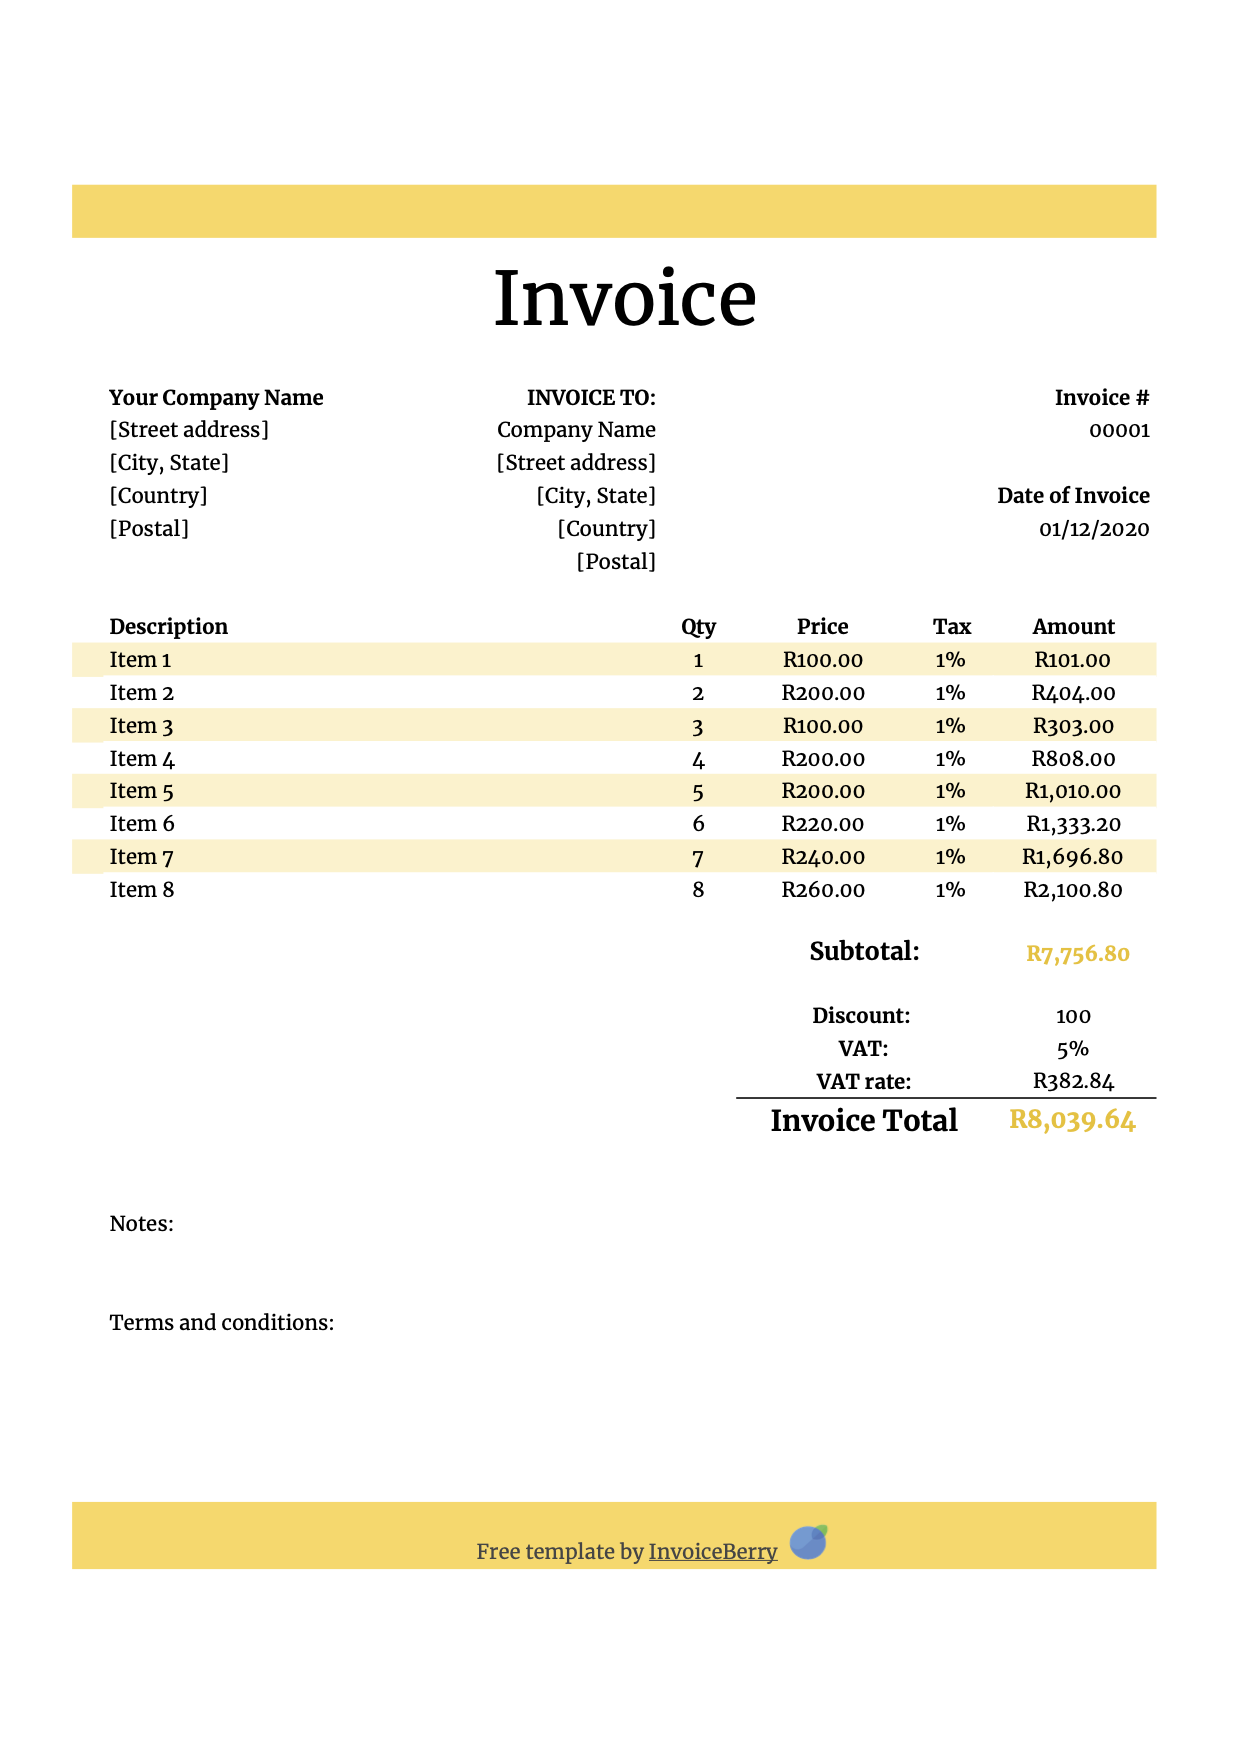 South Africa Google Sheet Invoice Template